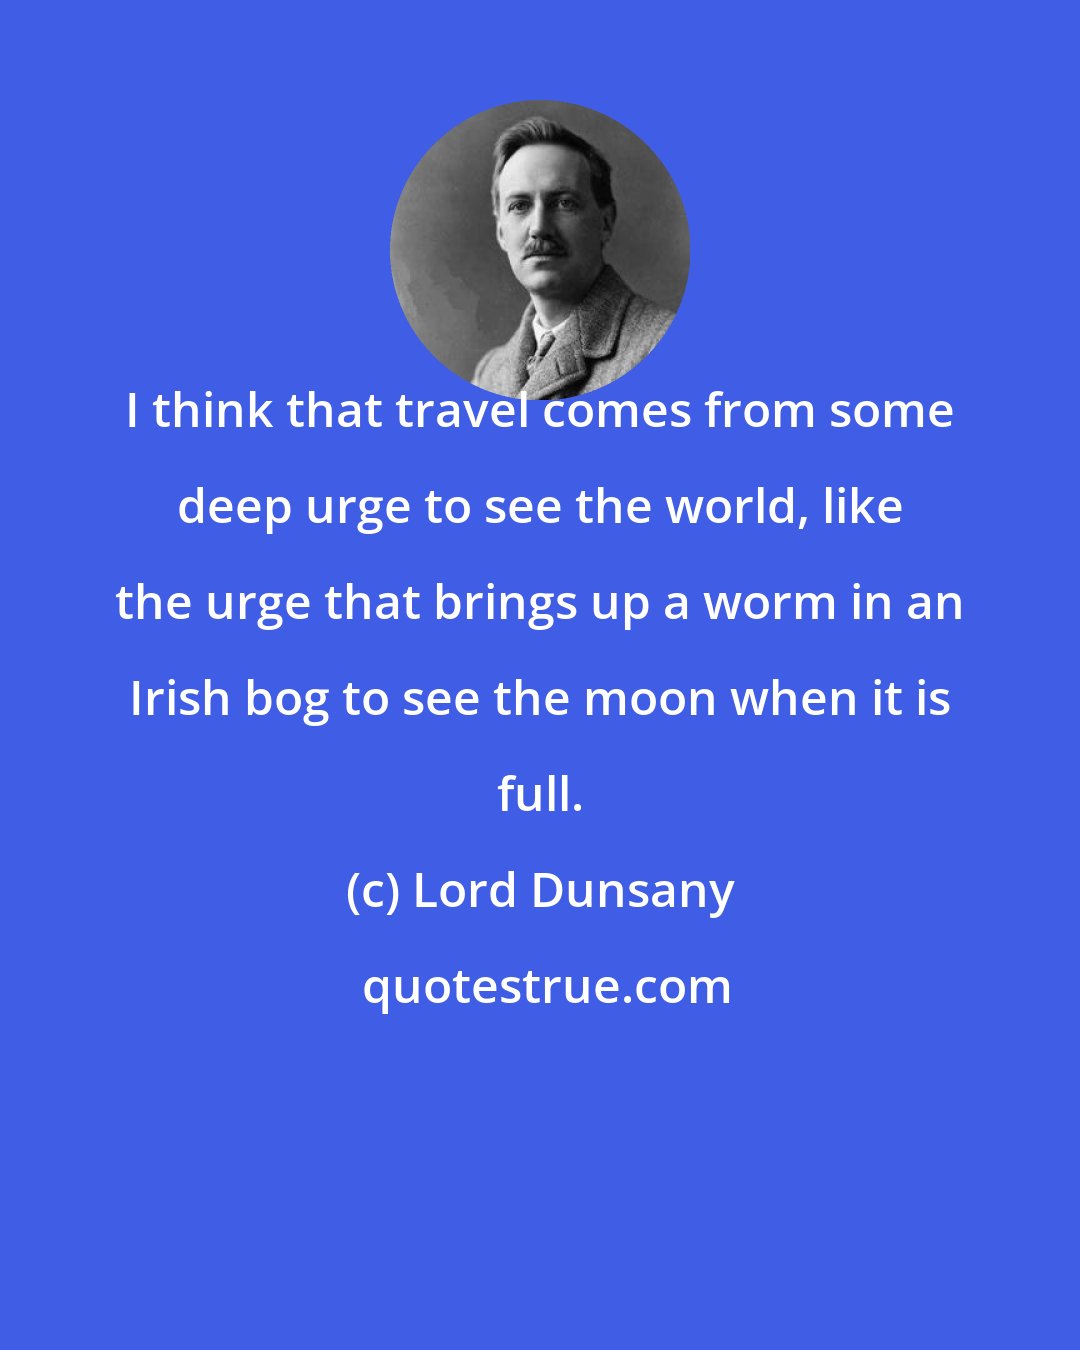 Lord Dunsany: I think that travel comes from some deep urge to see the world, like the urge that brings up a worm in an Irish bog to see the moon when it is full.